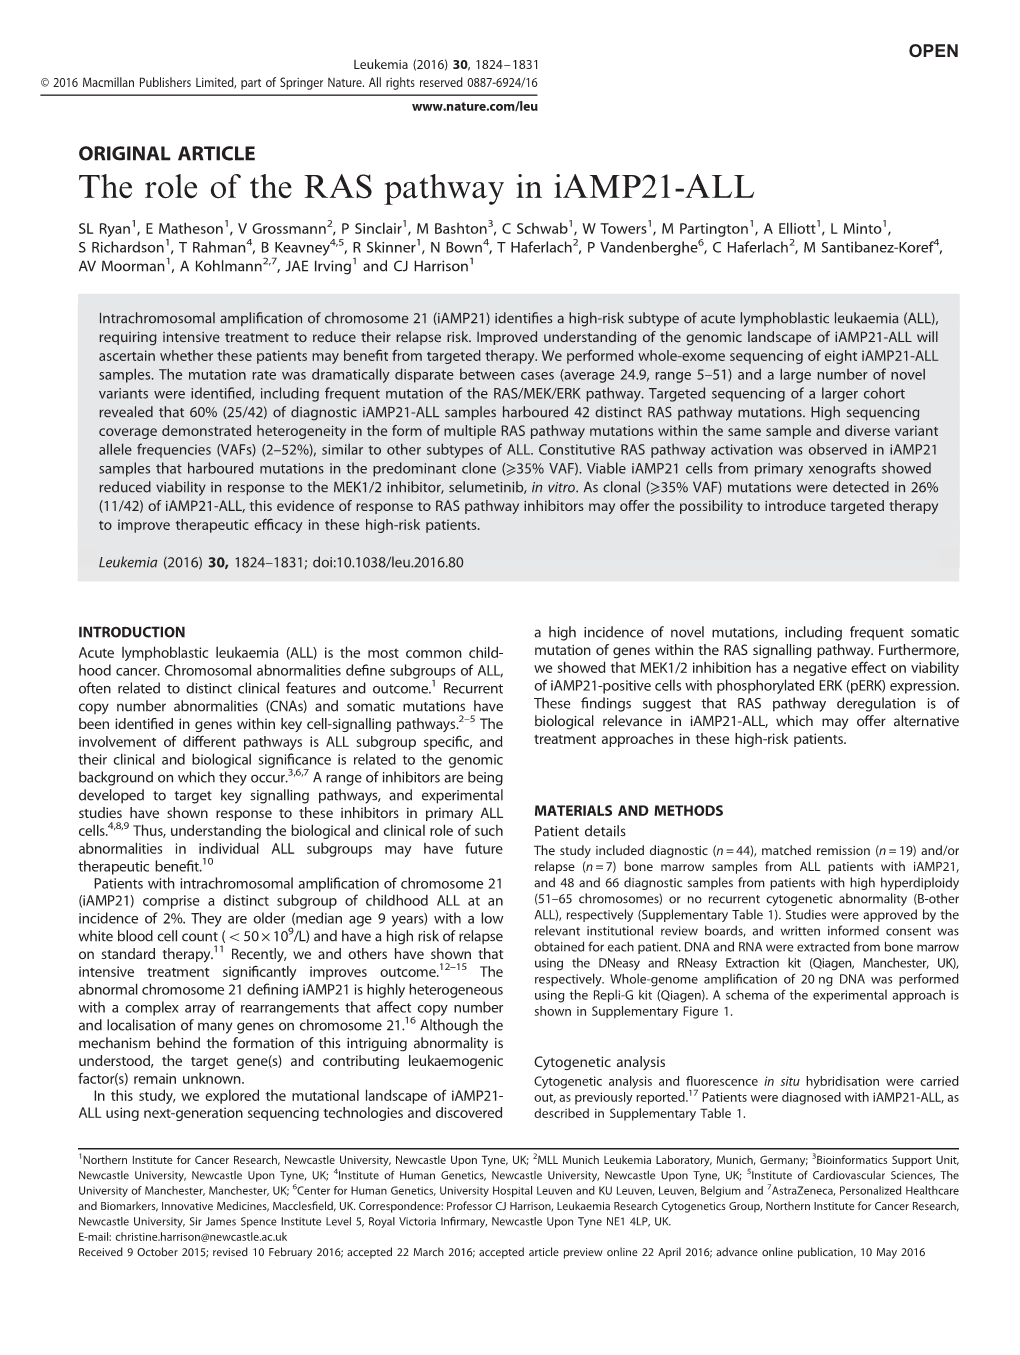 The Role of the RAS Pathway in Iamp21-ALL